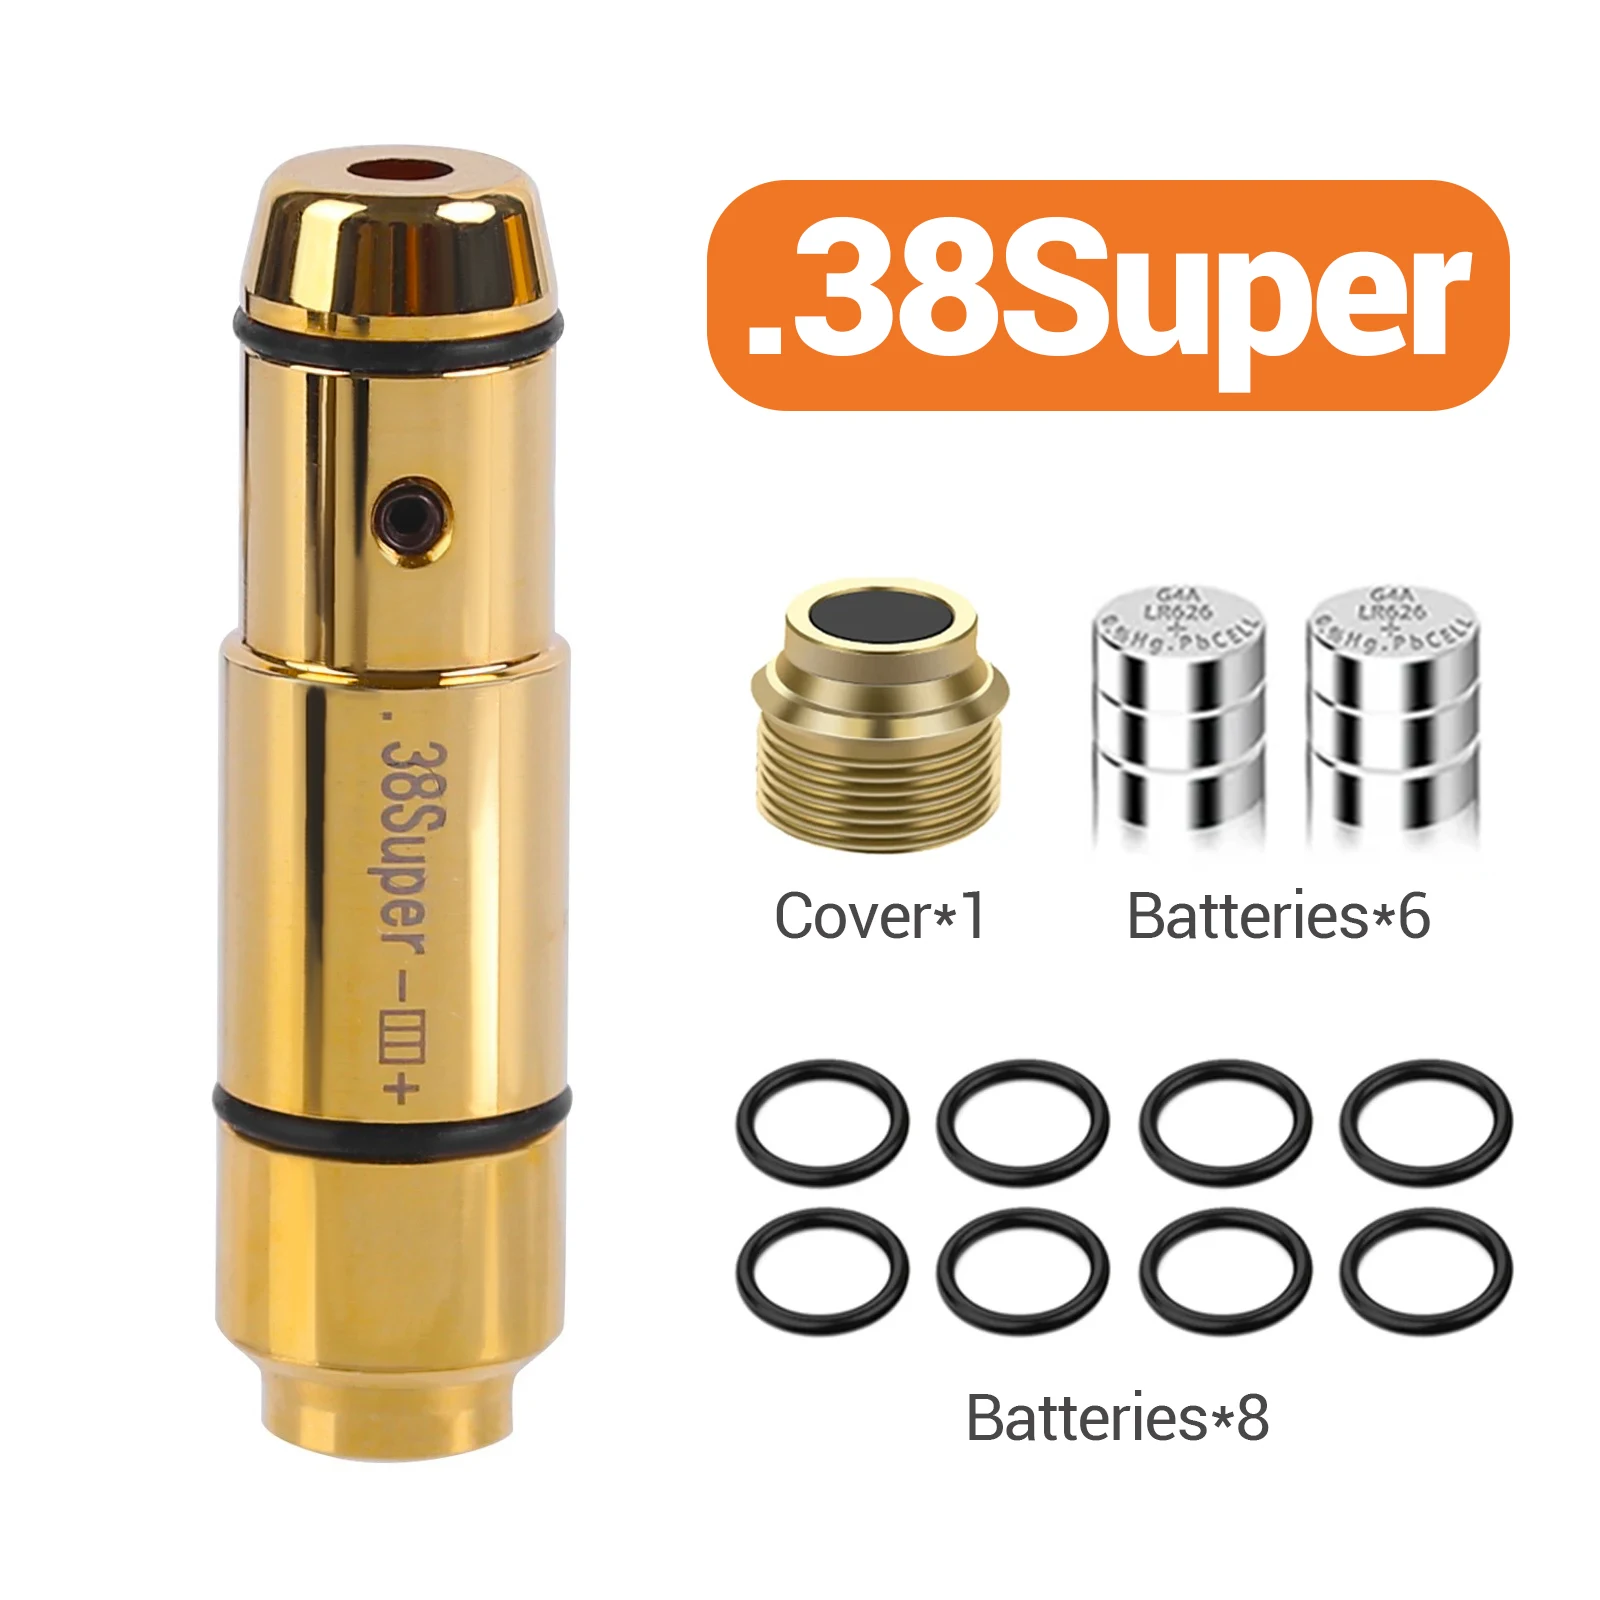 

.38Super Laser Training Bullet Laser Cartridge Dry Fire Laser Training Tactical Red Dot Laser Bore Sight Shooting Airsoft Access